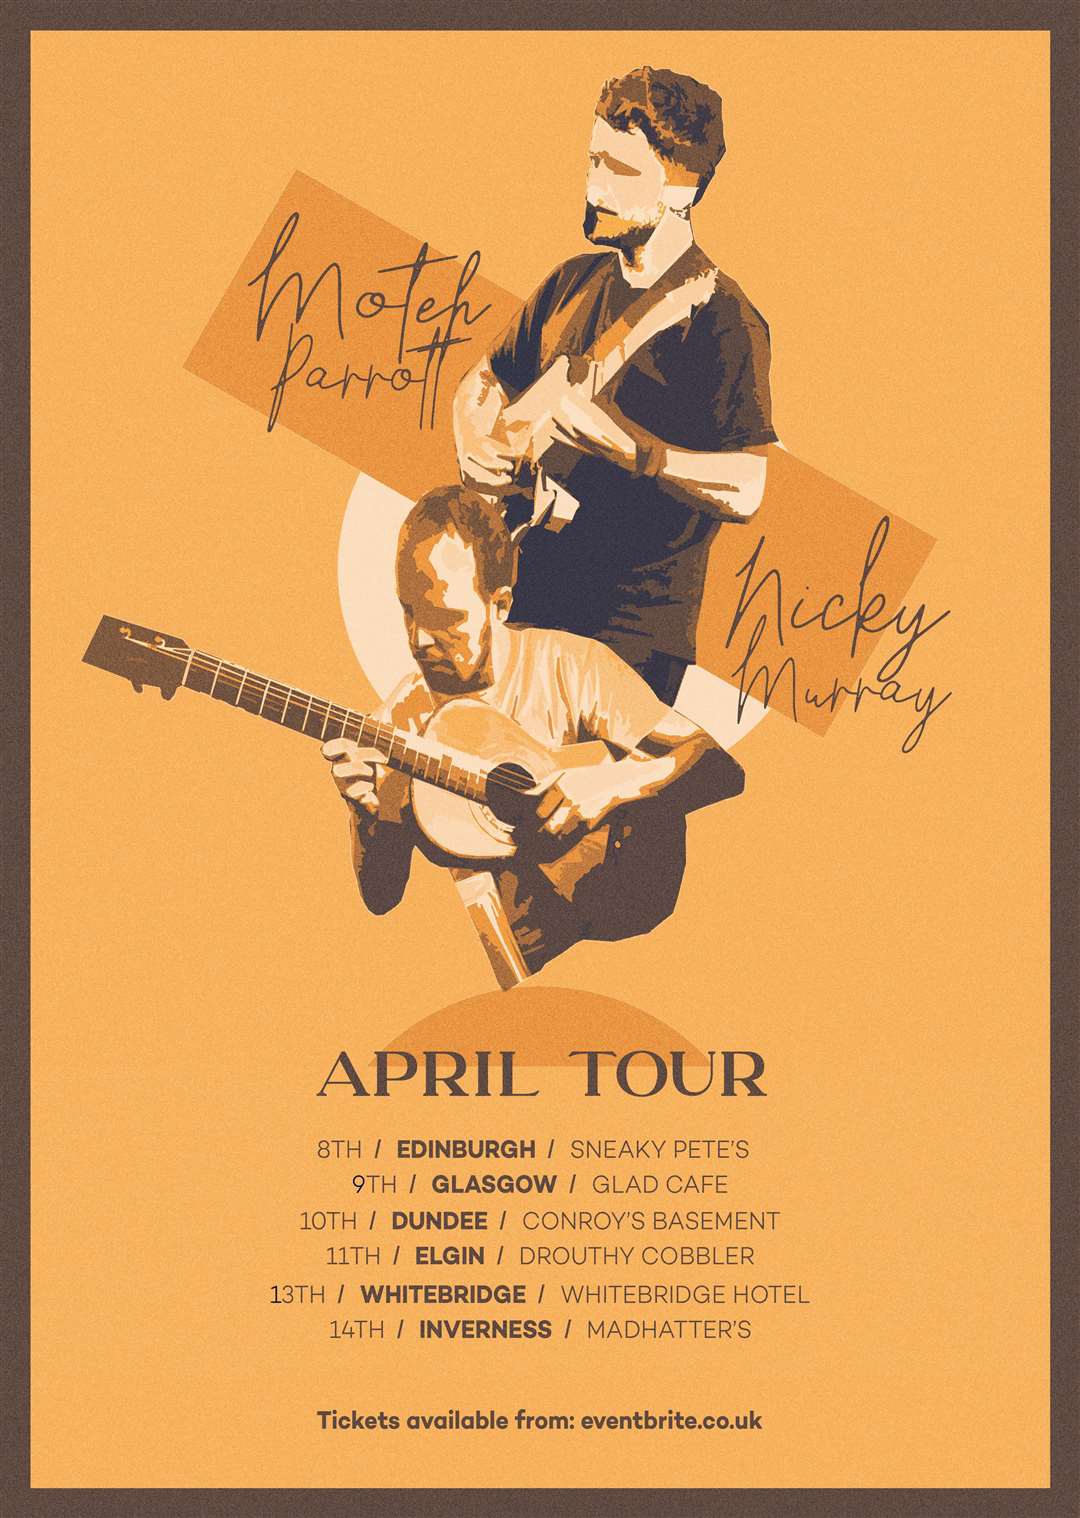 Poster for Nicky Murray and Moteh Parrott's joint Scottish tour.